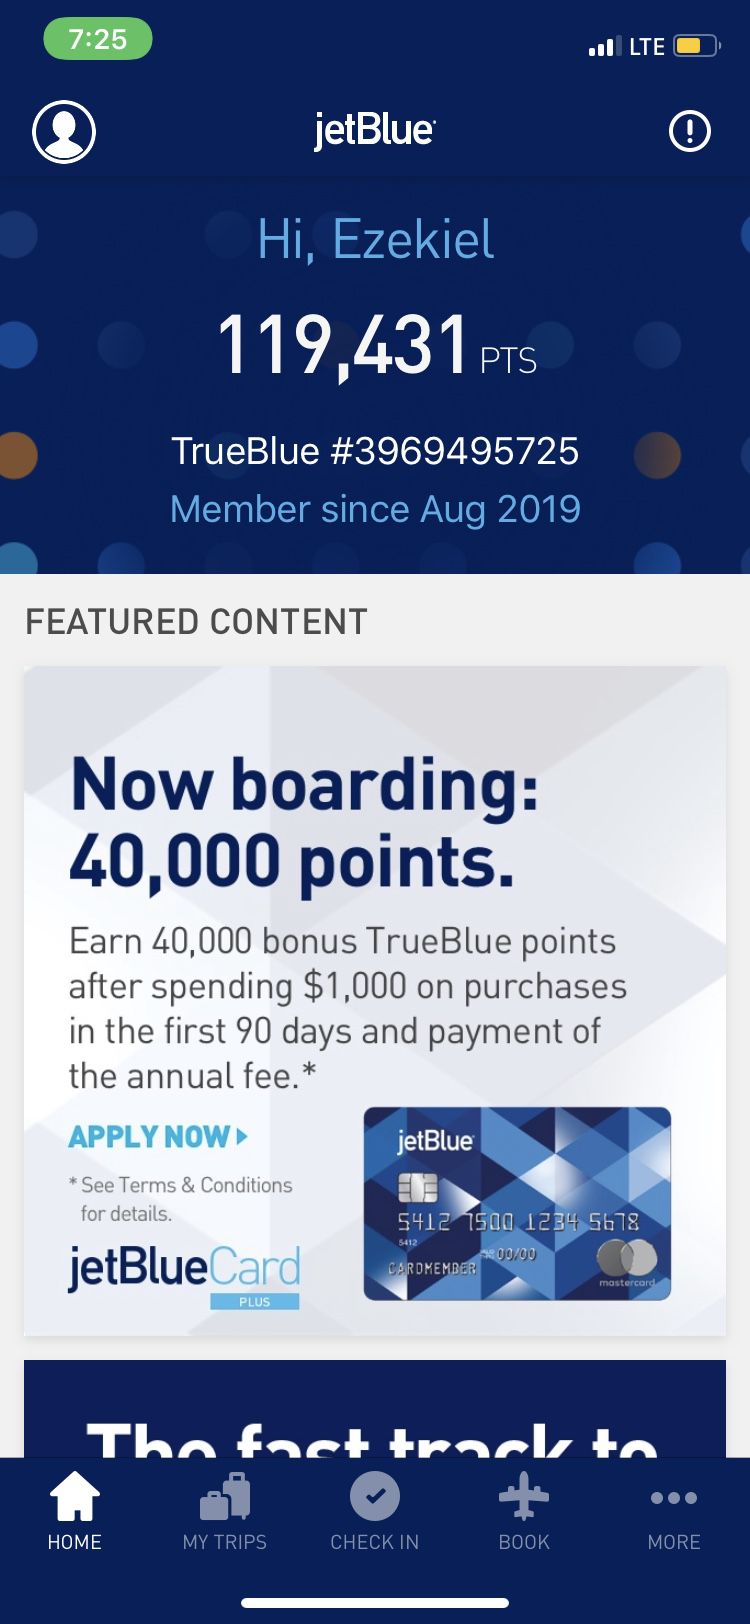 JetBlue airline ticket *Not Real Price*